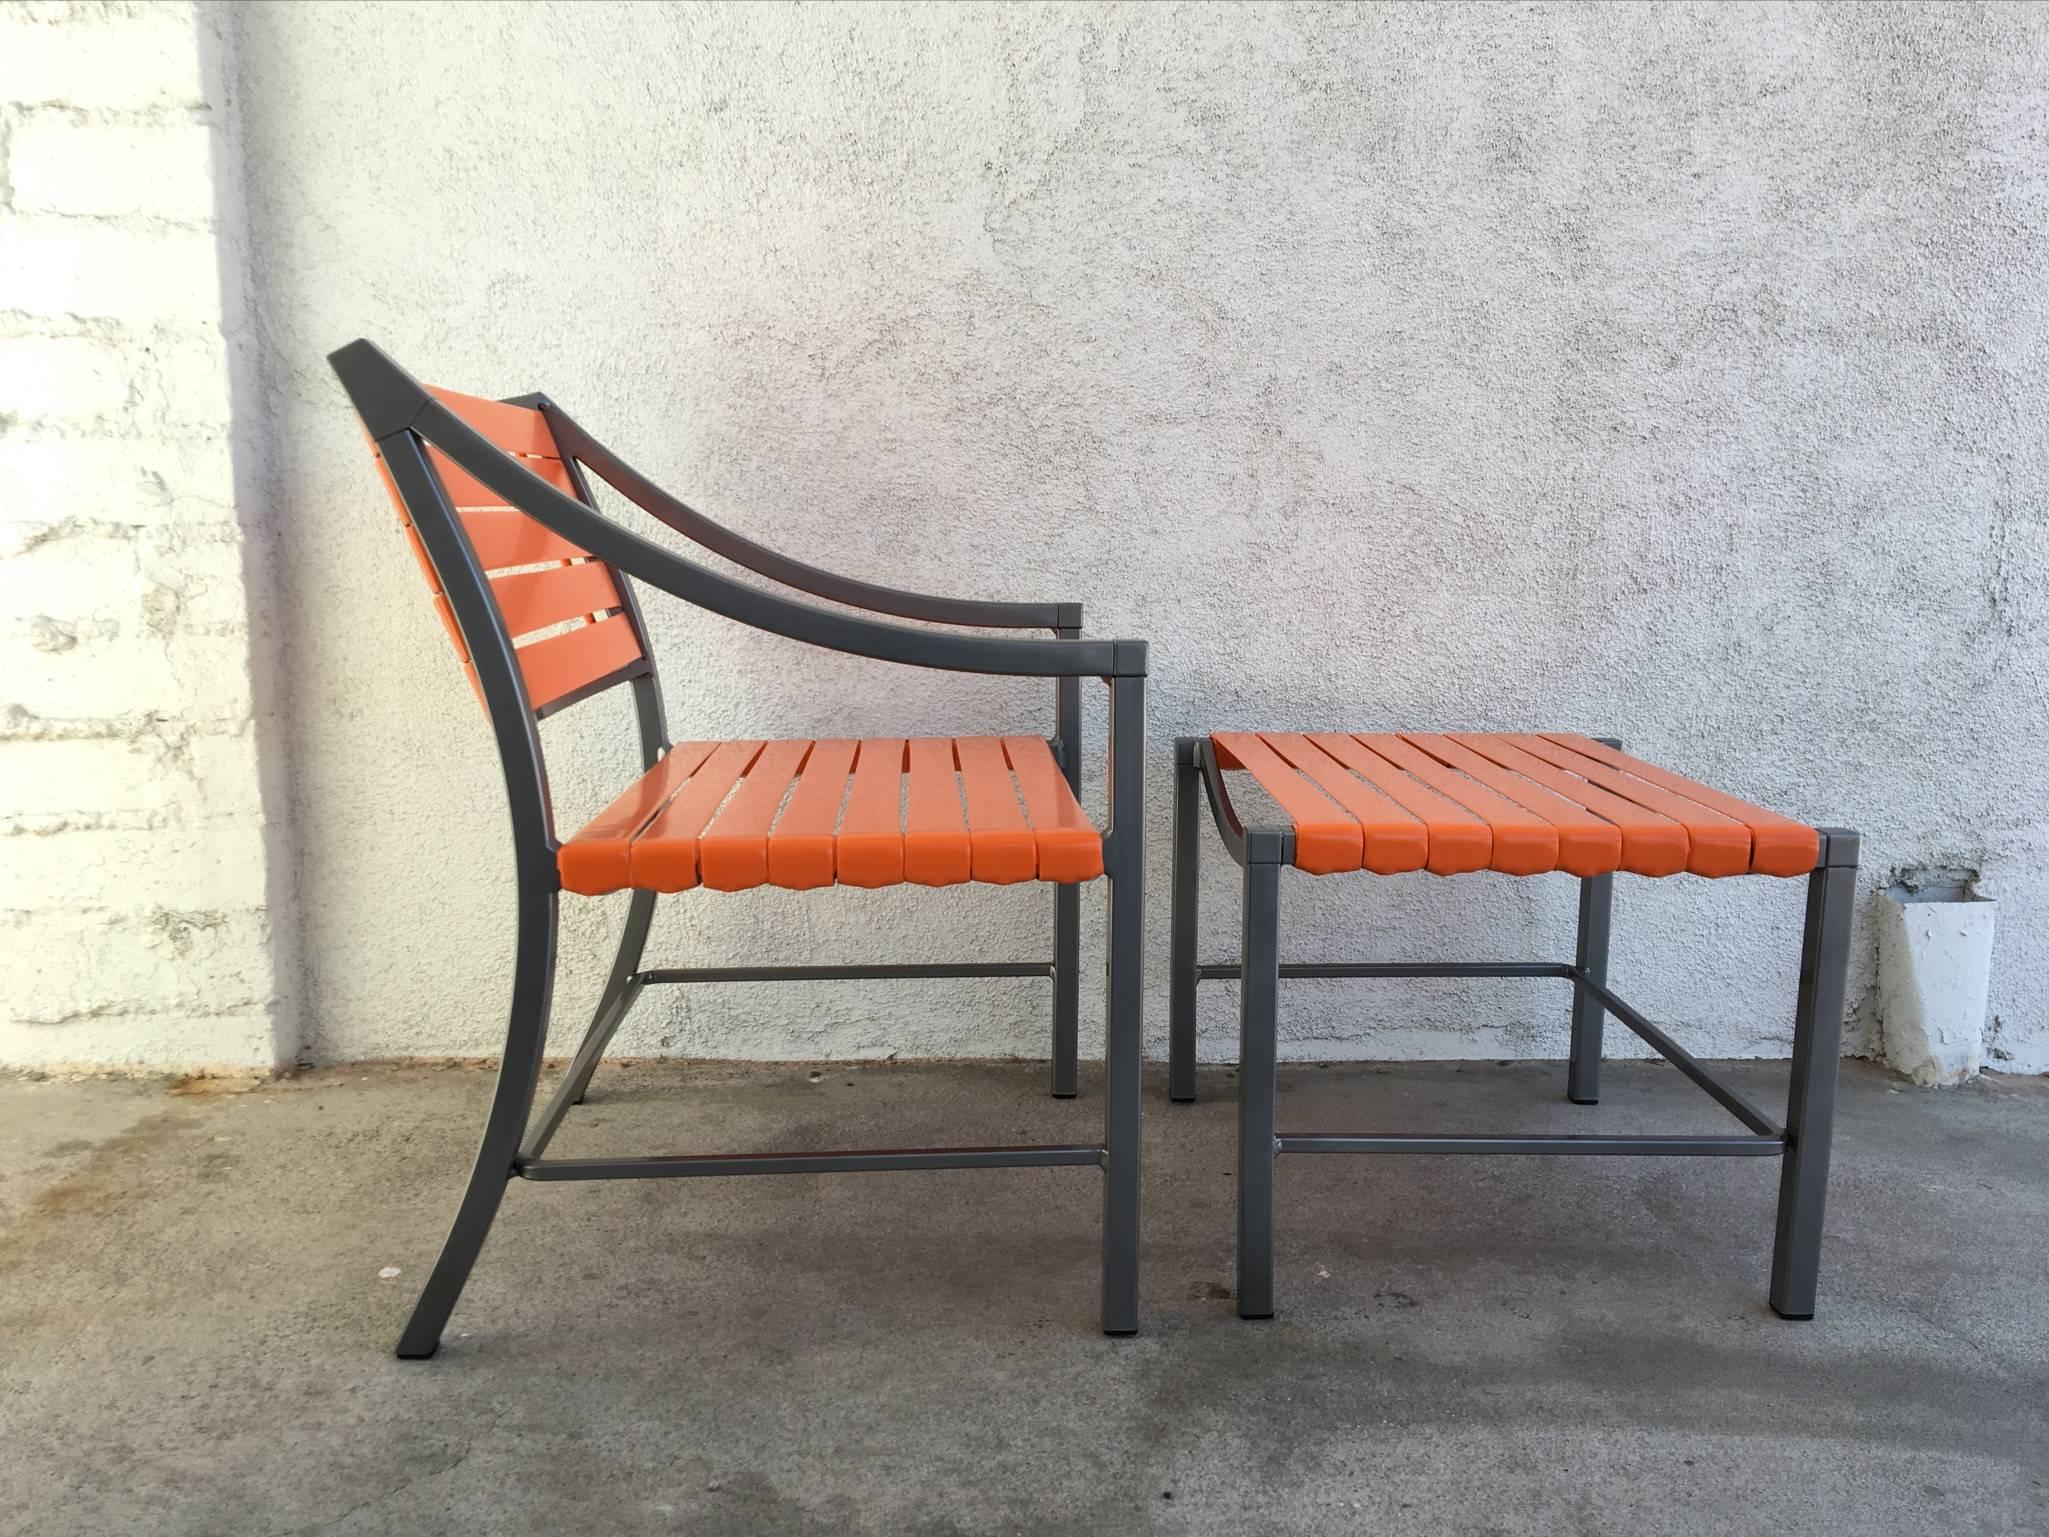 Powder-Coated Pair of Outdoor Chairs and Ottomans by Brown Jordan